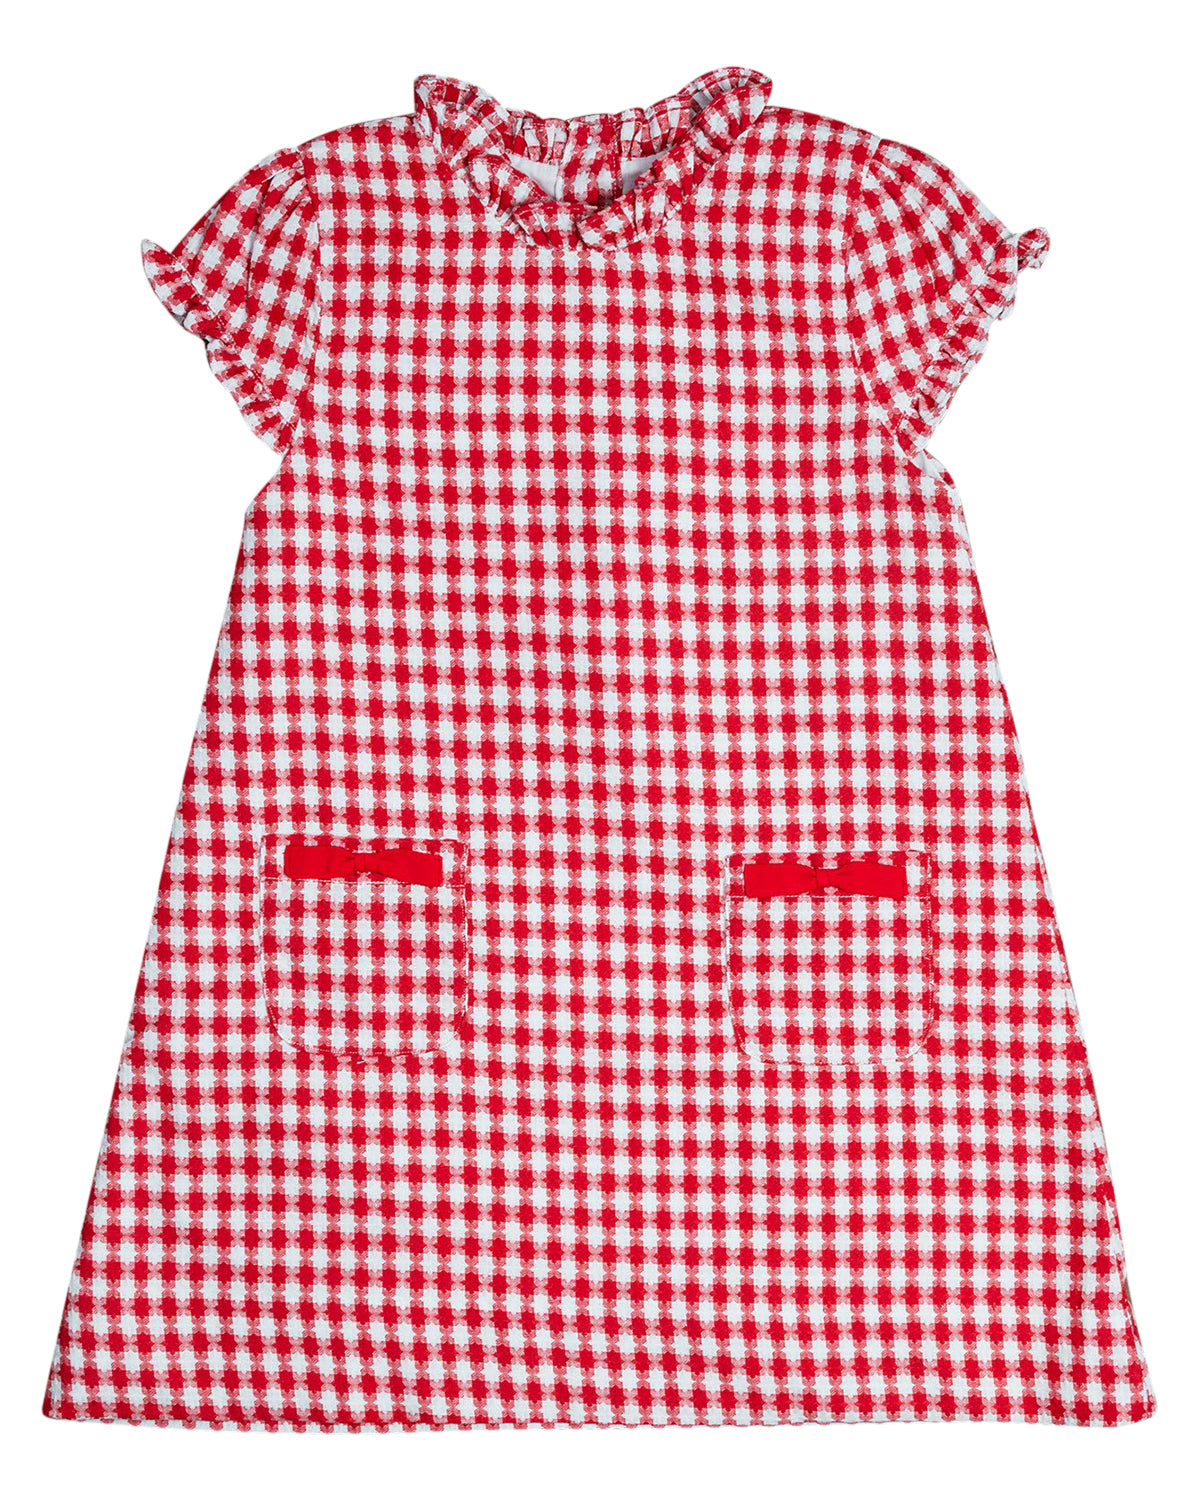 Red and White Jacquard A-Line Dress